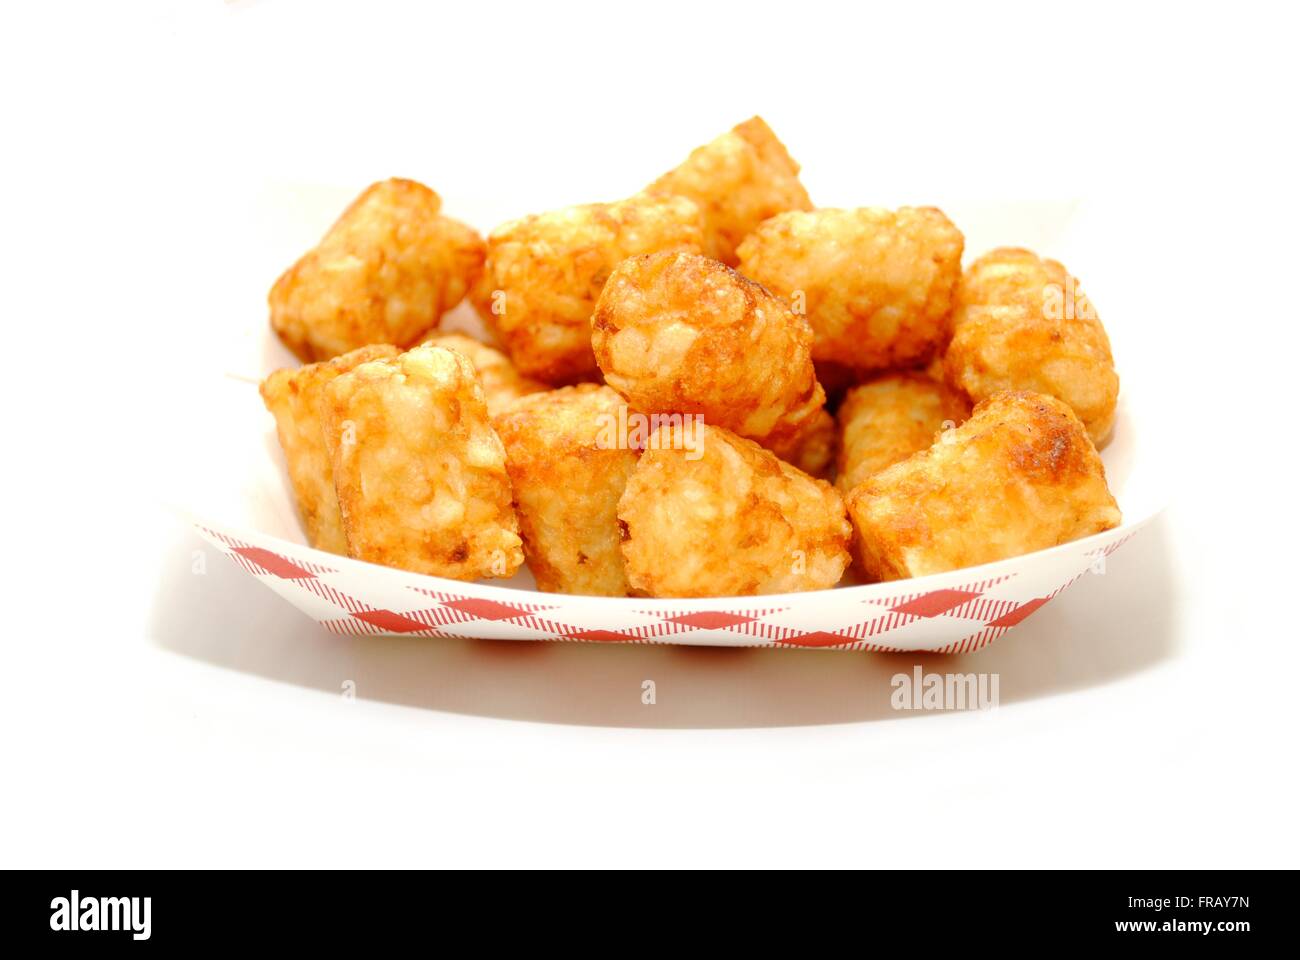 https://c8.alamy.com/comp/FRAY7N/a-fast-food-container-of-crispy-tater-tots-FRAY7N.jpg